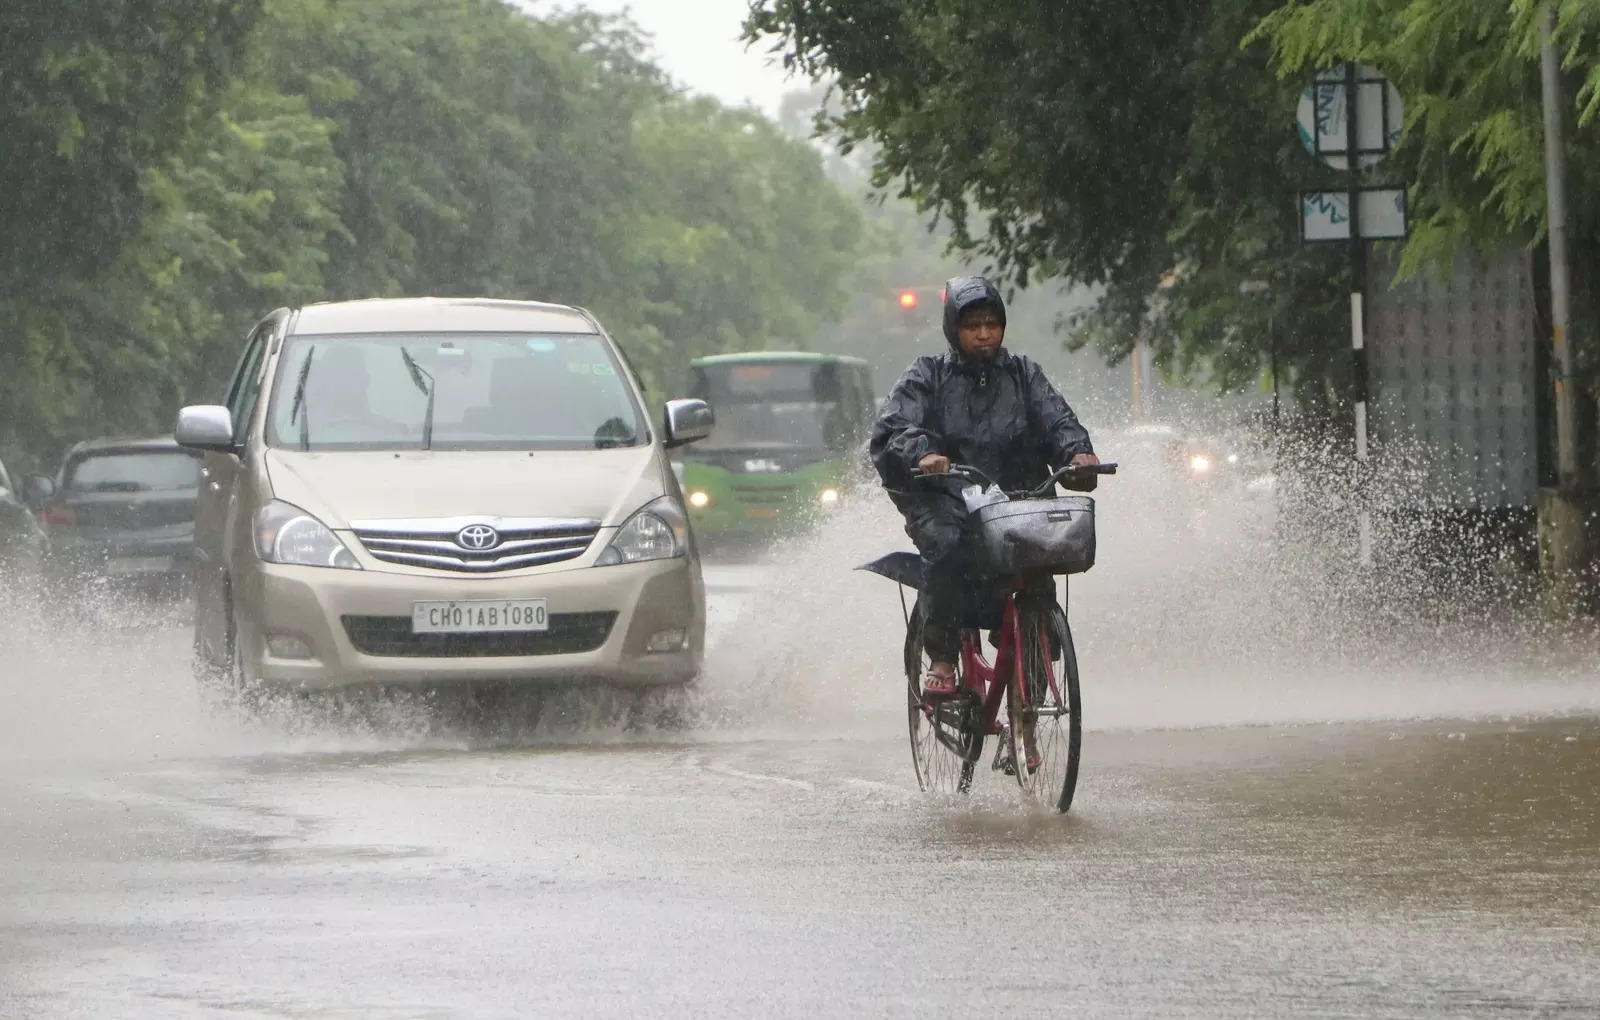 Monsoon Weather News: Most of Haryana, Punjab receive surplus rains as  monsoon picks up pace - The Times of India